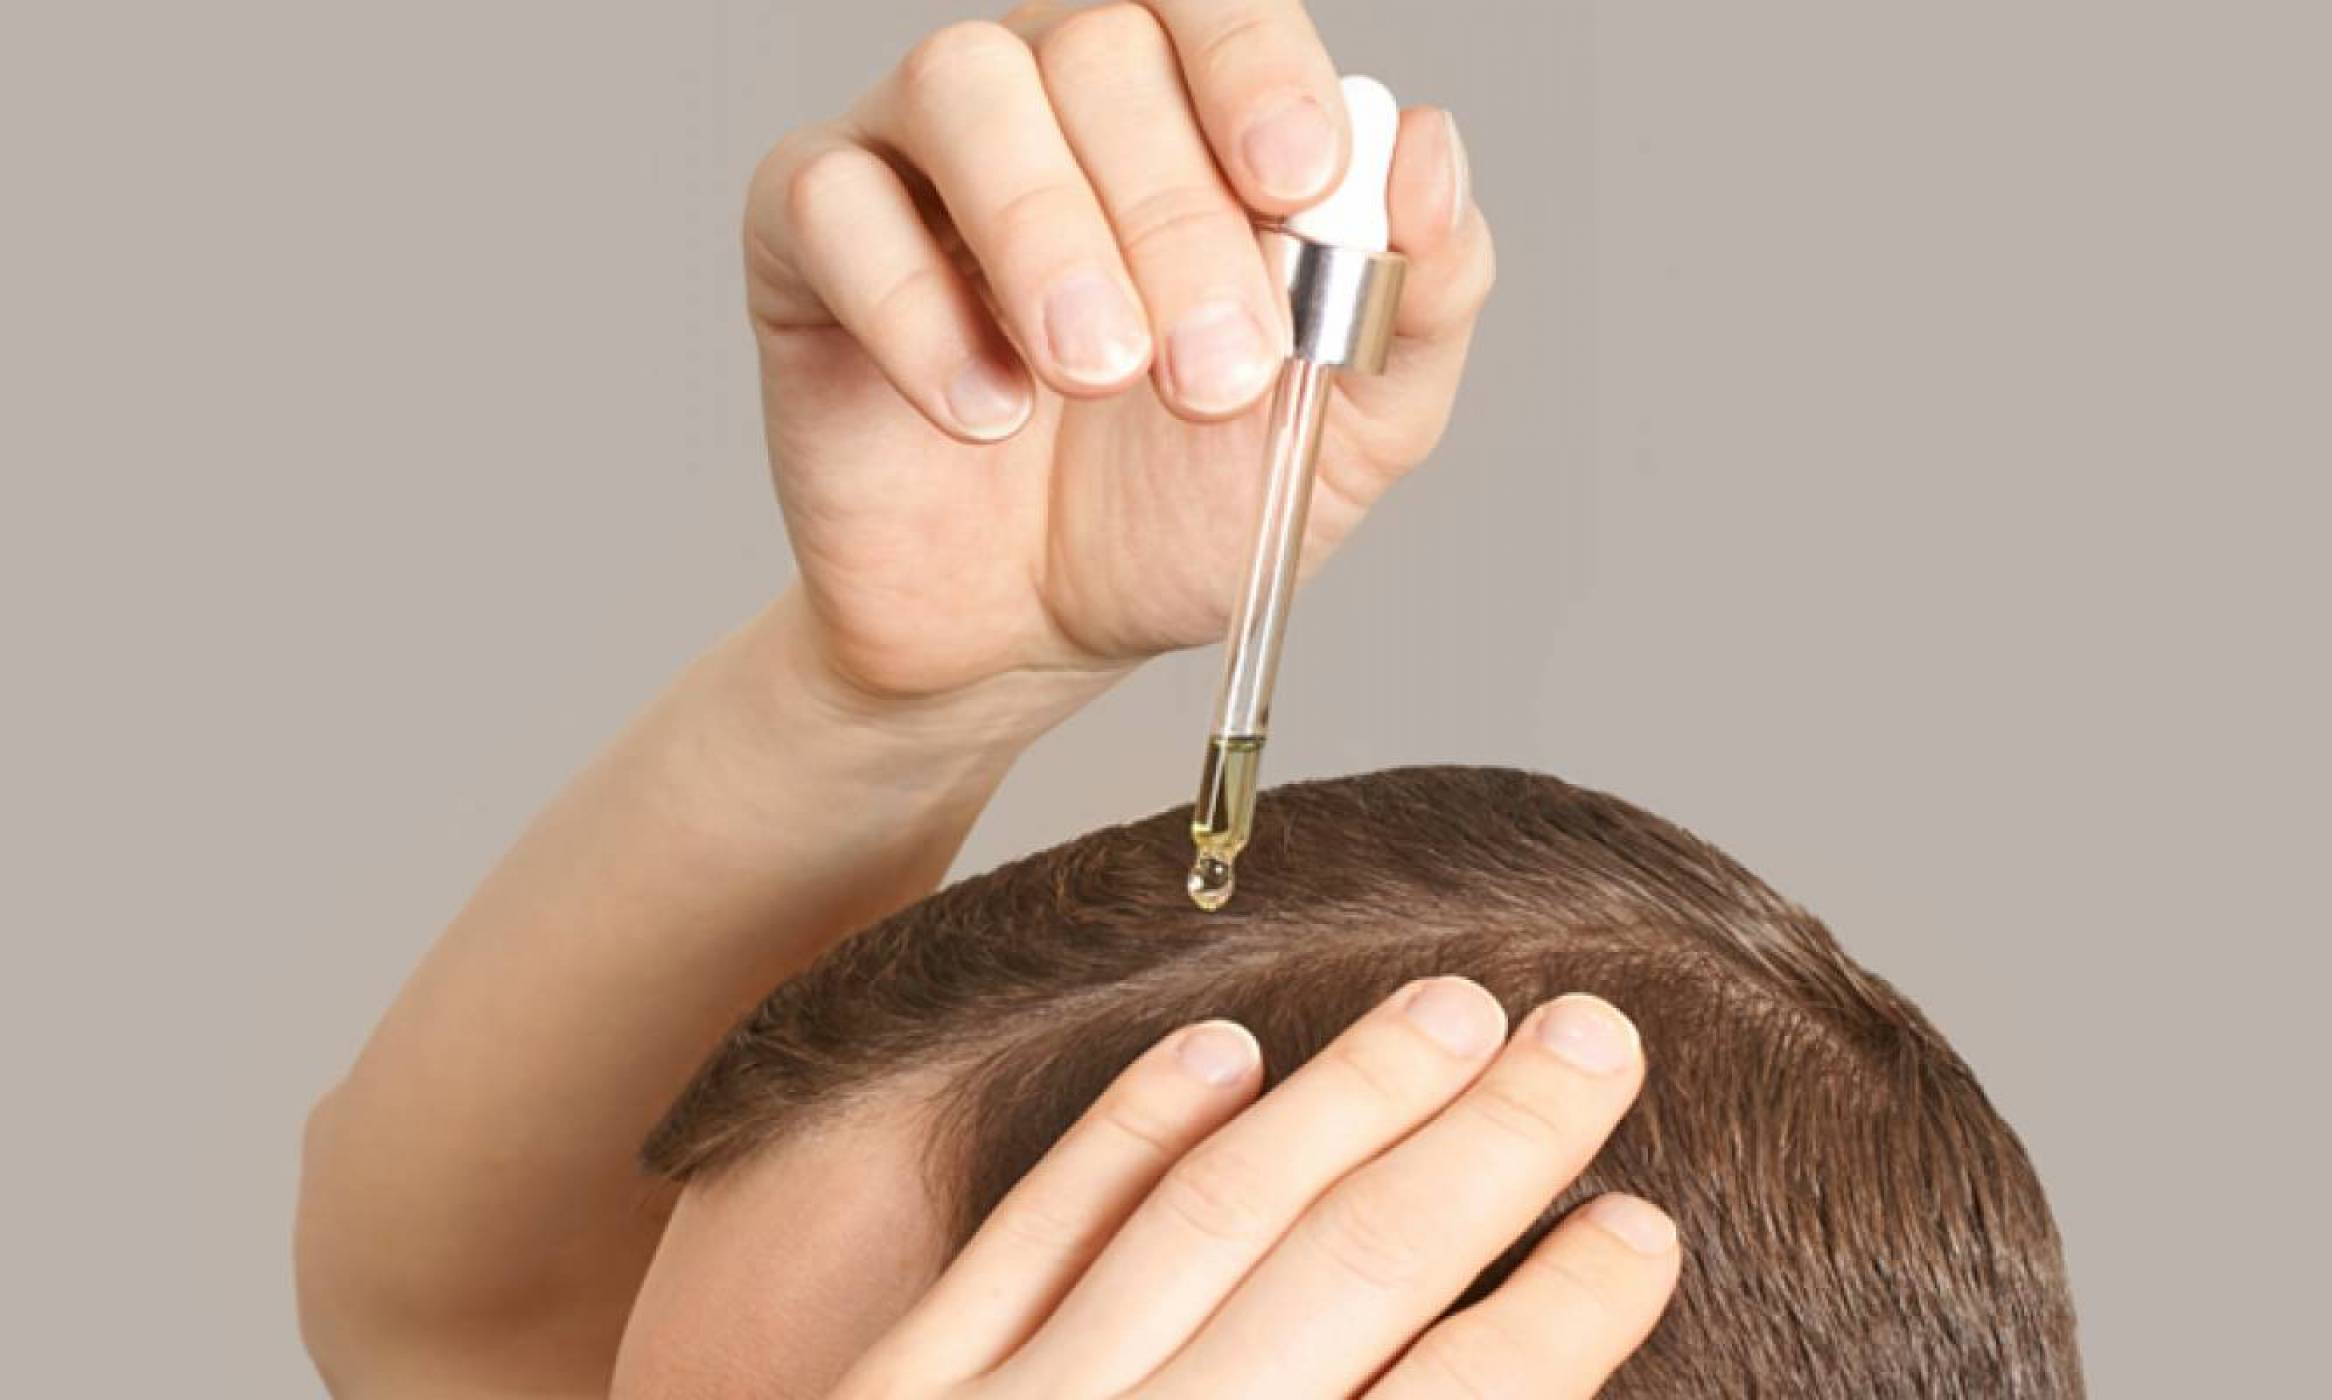 A confident man with a full head of hair is applying a hair regrowth product that treats hair loss.